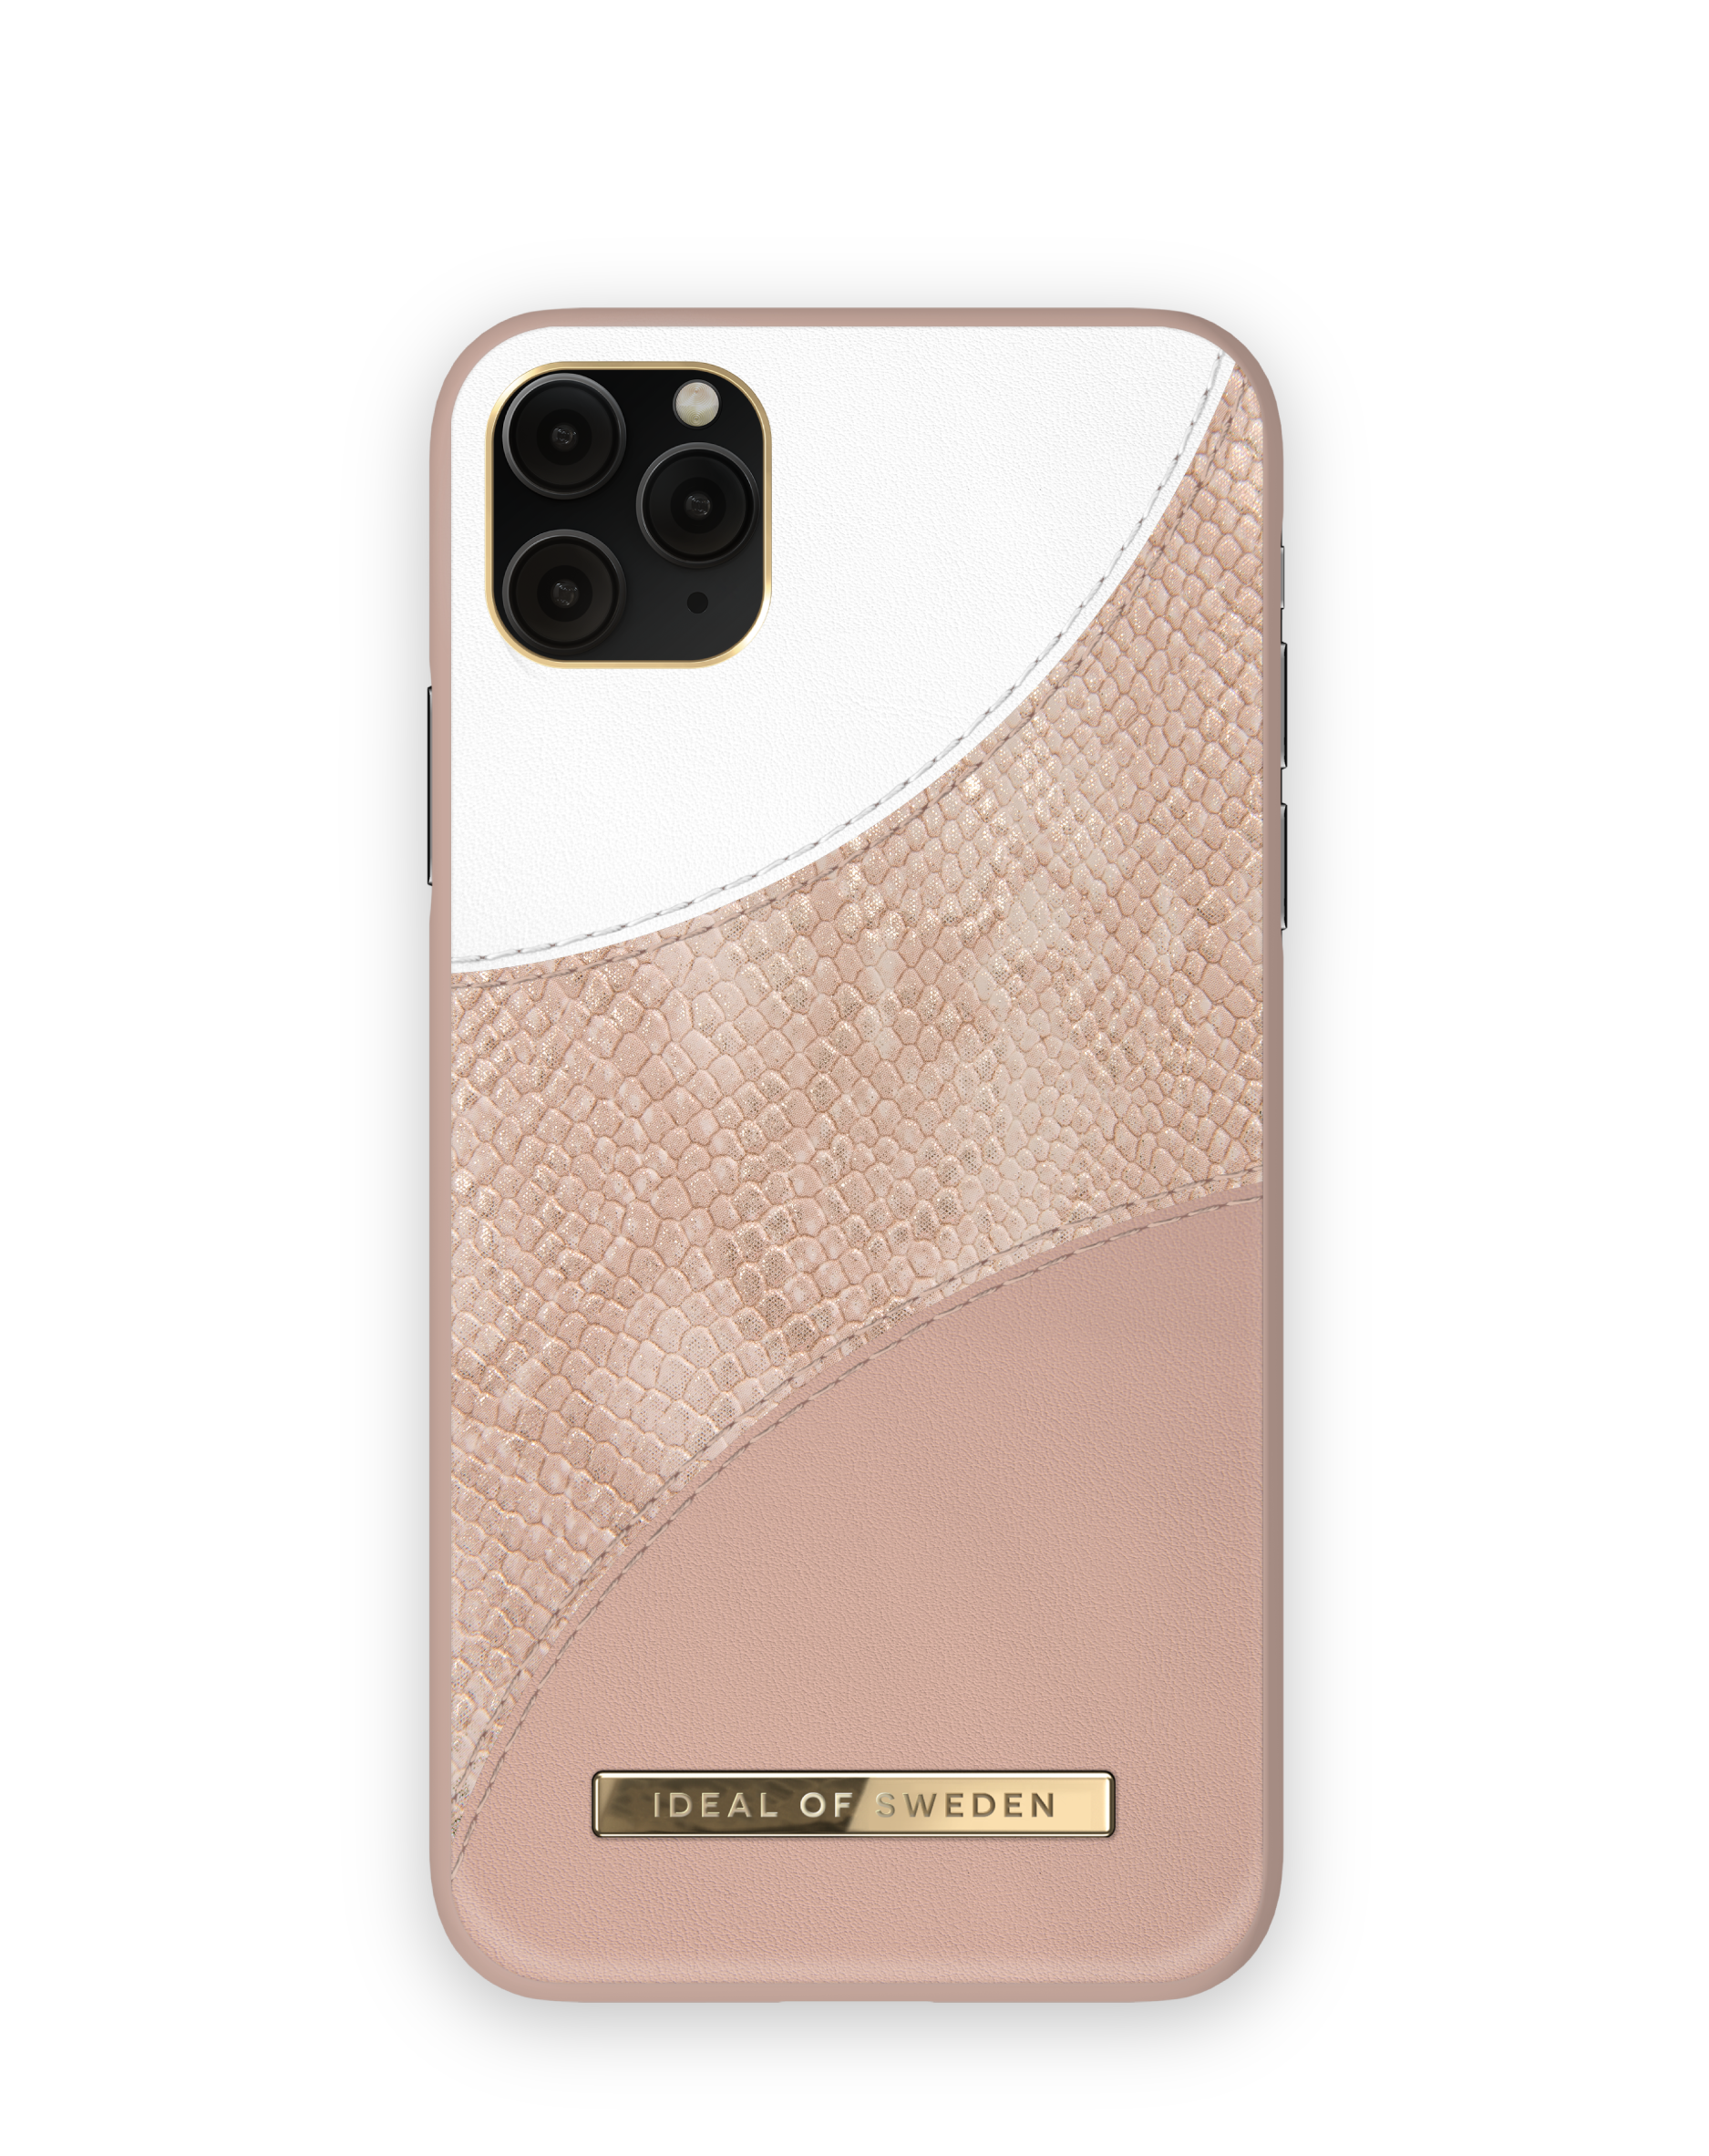 IDEAL OF SWEDEN Apple IDACSS21-I1965-269, Snake Backcover, Apple Max, Max, 11 Pink Blush iPhone Pro iPhone Apple, XS